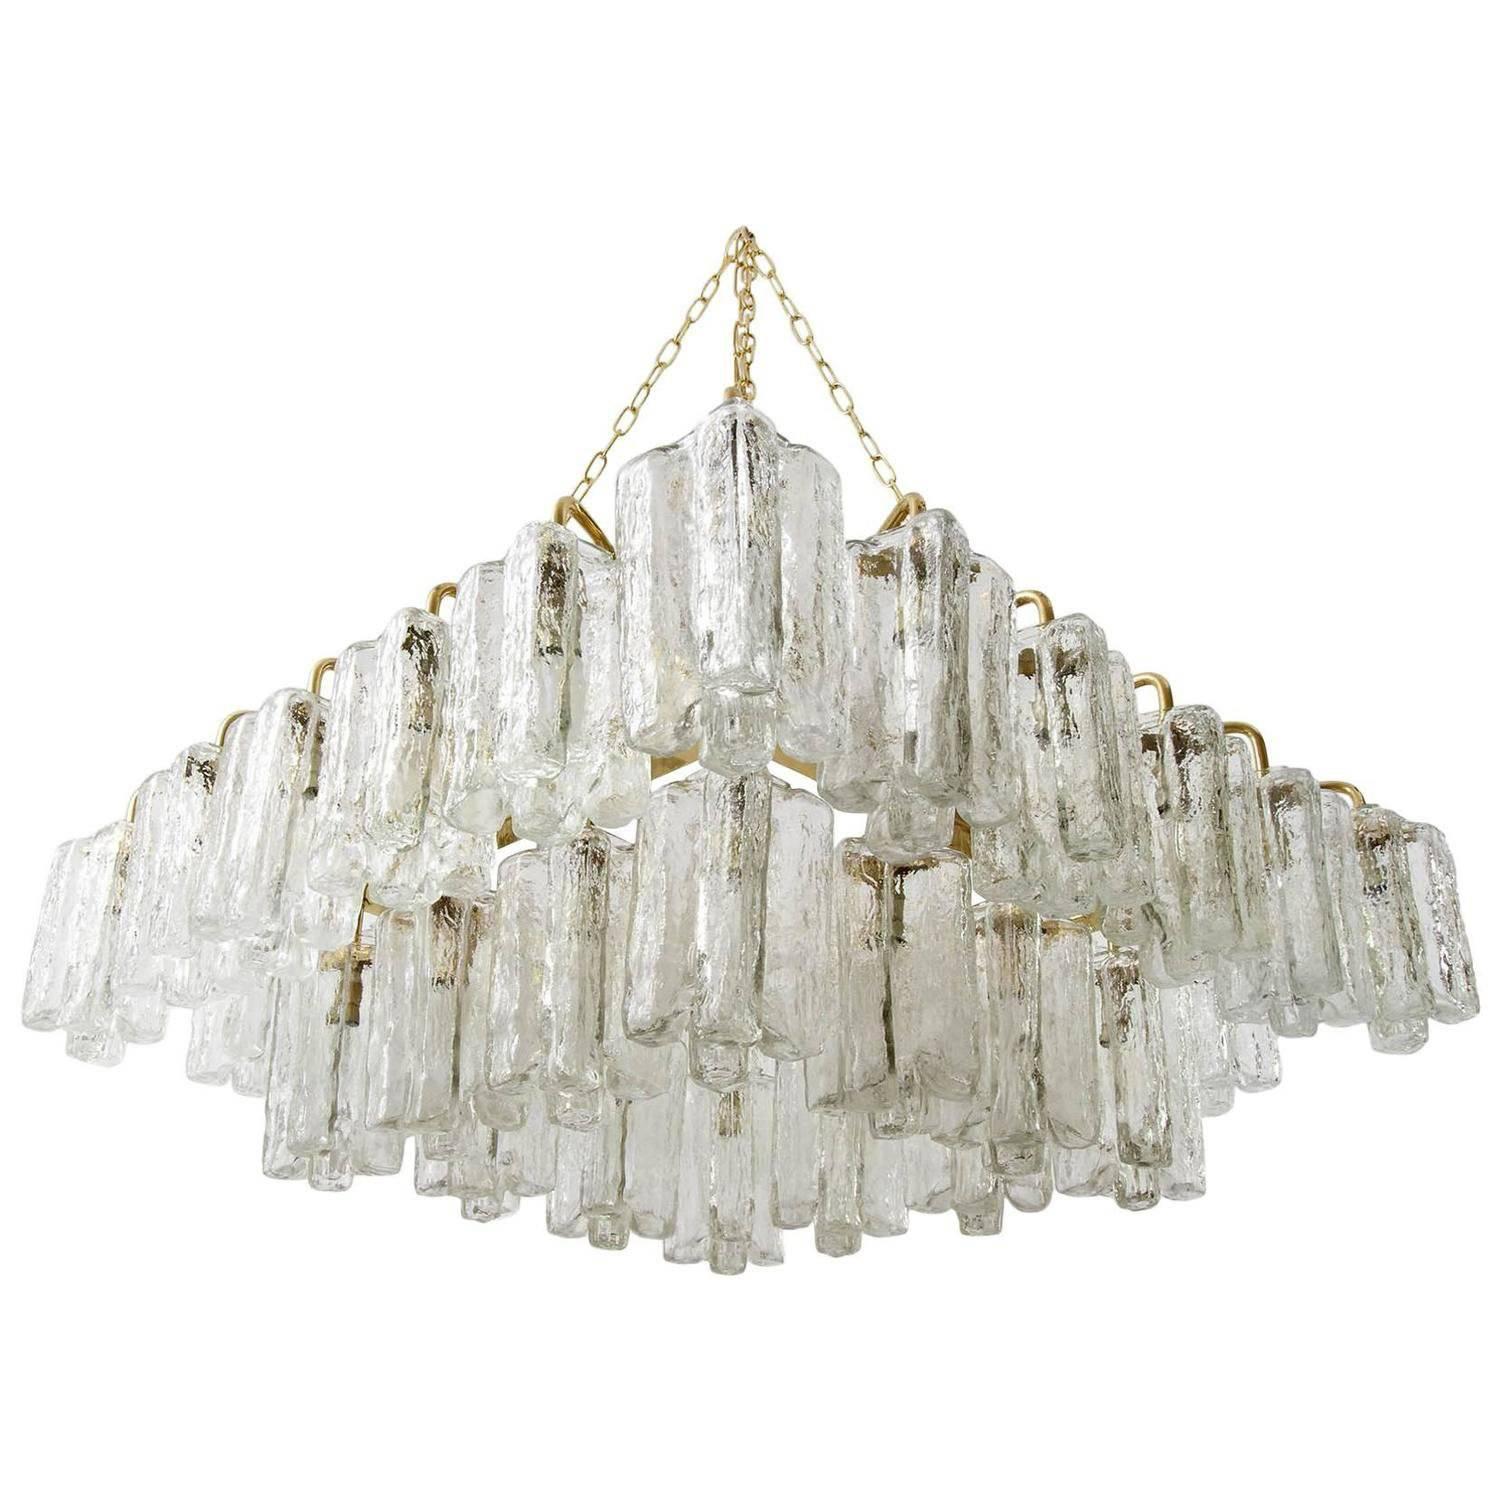 One of two square and very large 'Granada' light fixtures by J.T. Kalmar, Austria, manufactured in midcentury, circa 1970 (late 1960s-early 1970s).
The lamps can be used as pendant light / chandelier or as flush mount light because they can be hung